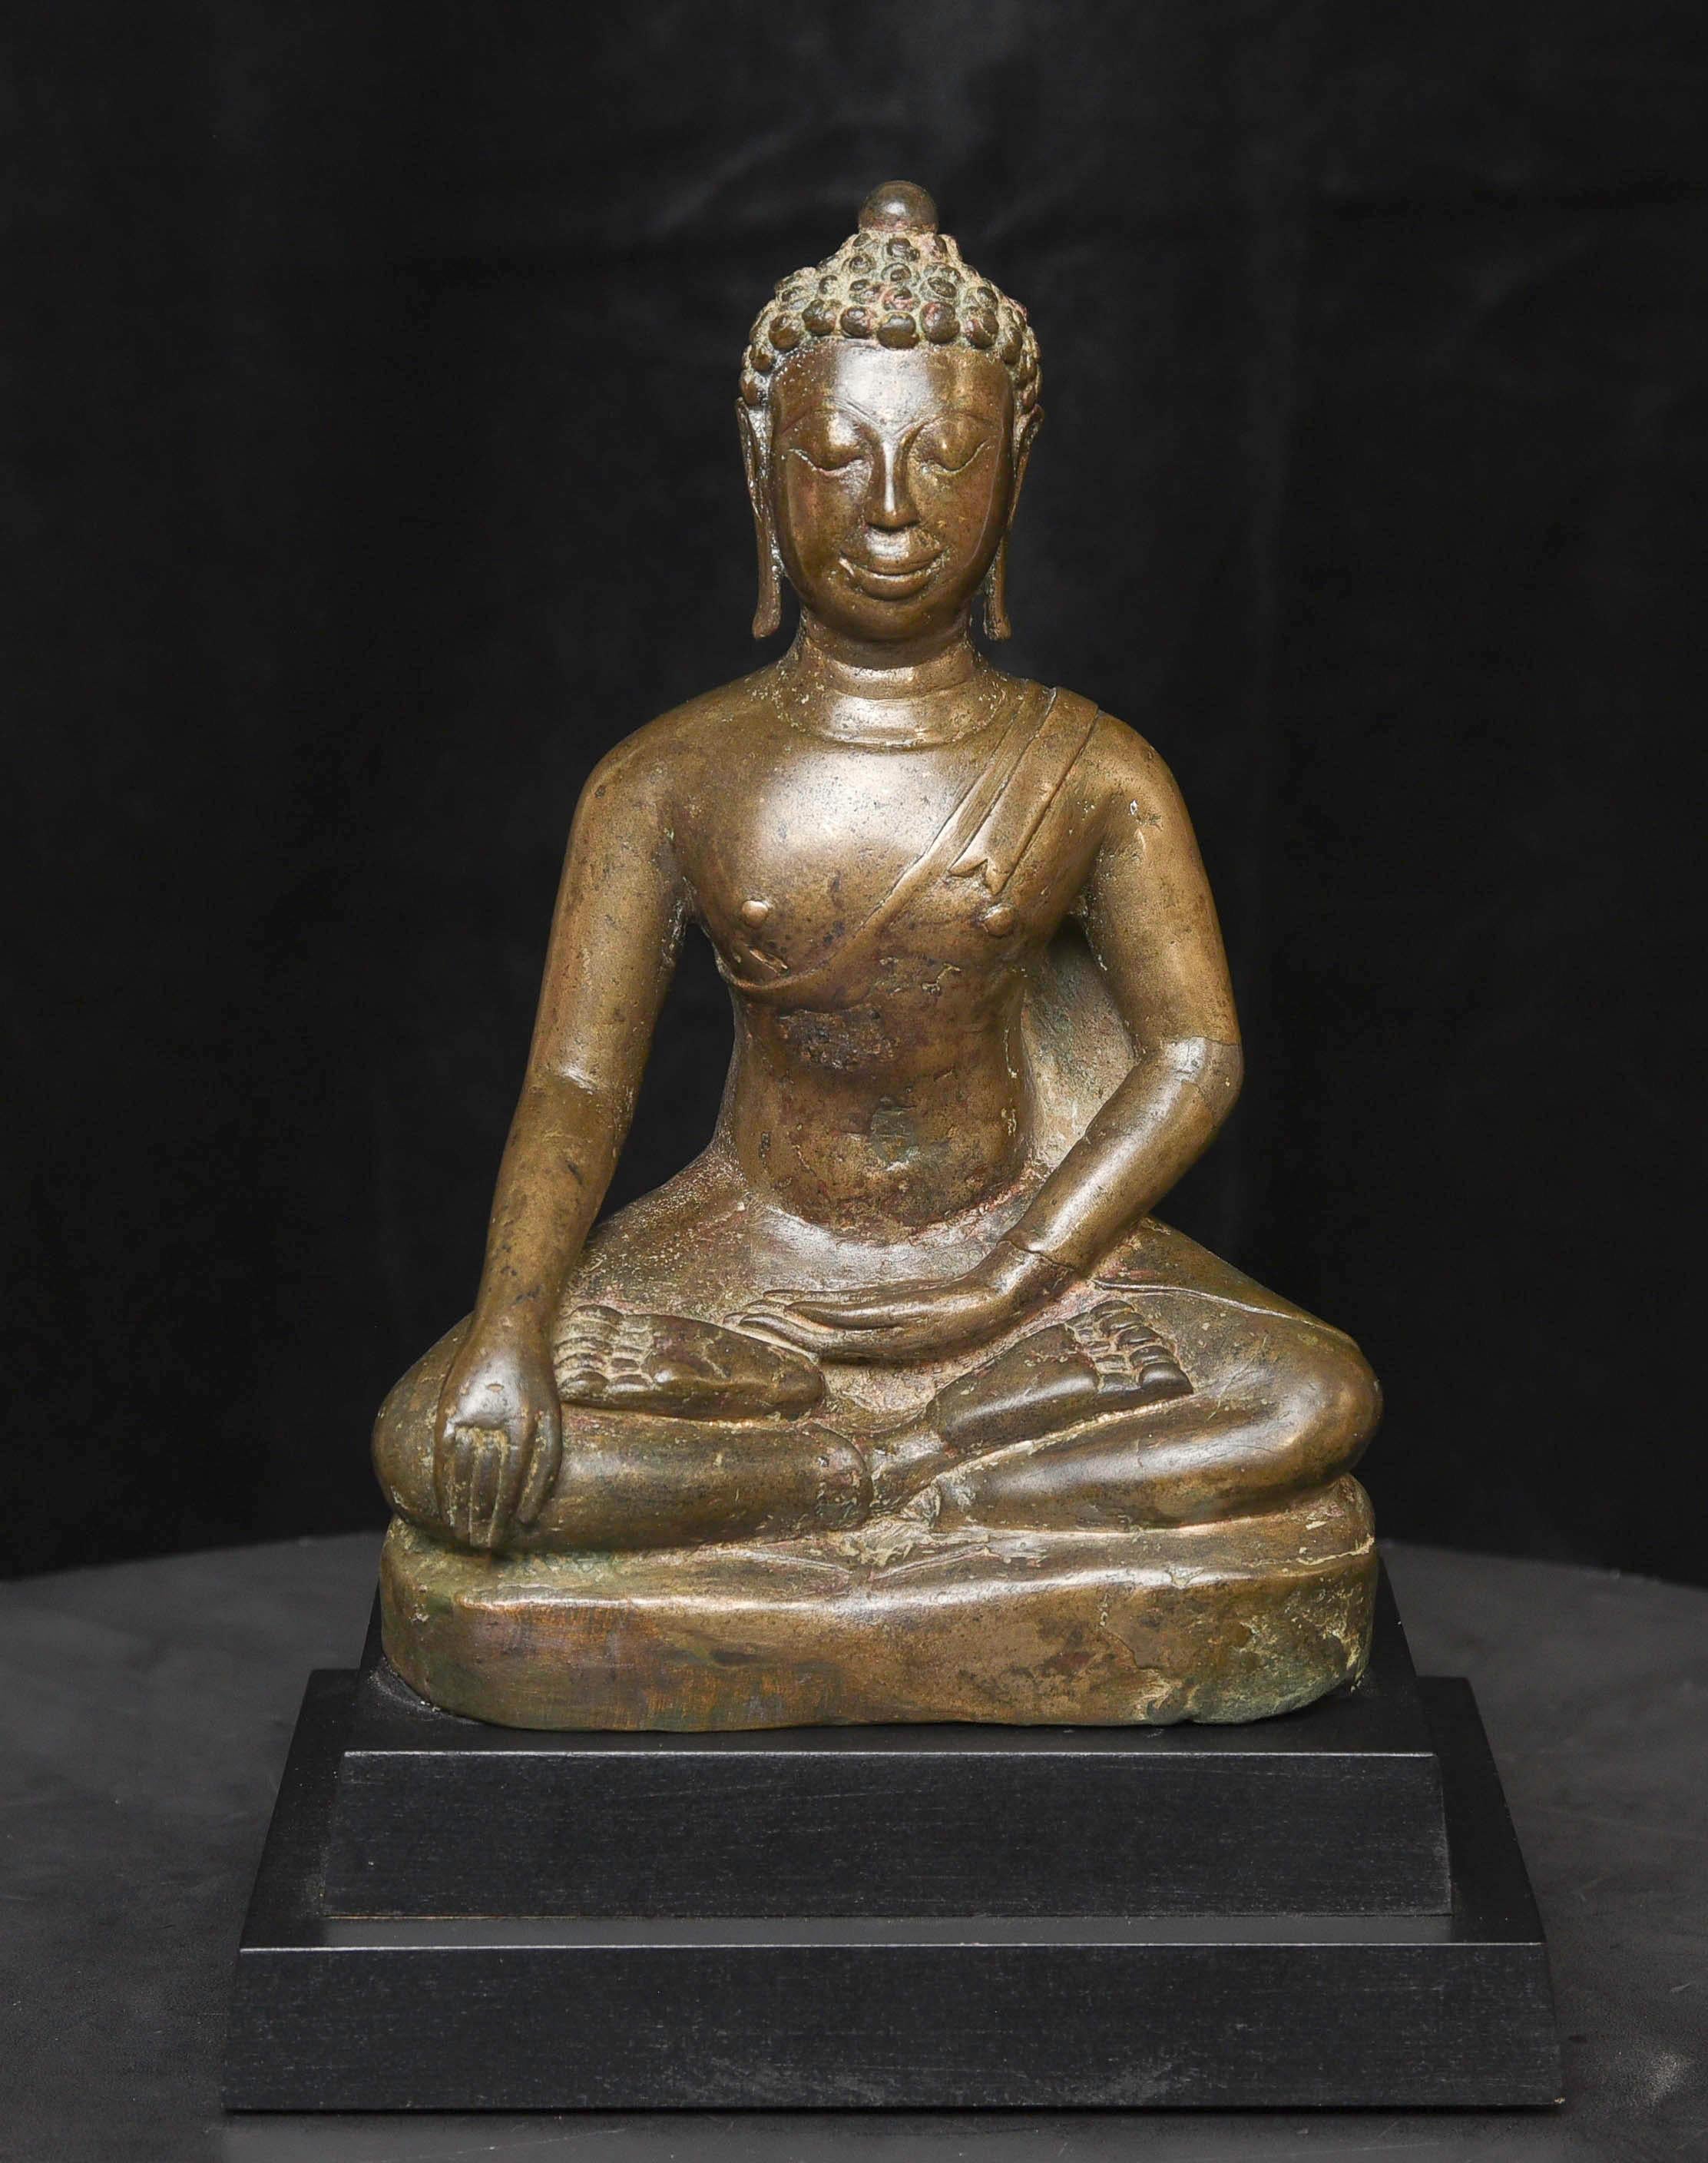 This may be my all-time favorite of all the SE Asian Buddhas I have ever owned--and that is saying a lot, as I have owned many thousands over a thirty-five-year period. It is a very special transitional Buddha from the Dvarati period to the very